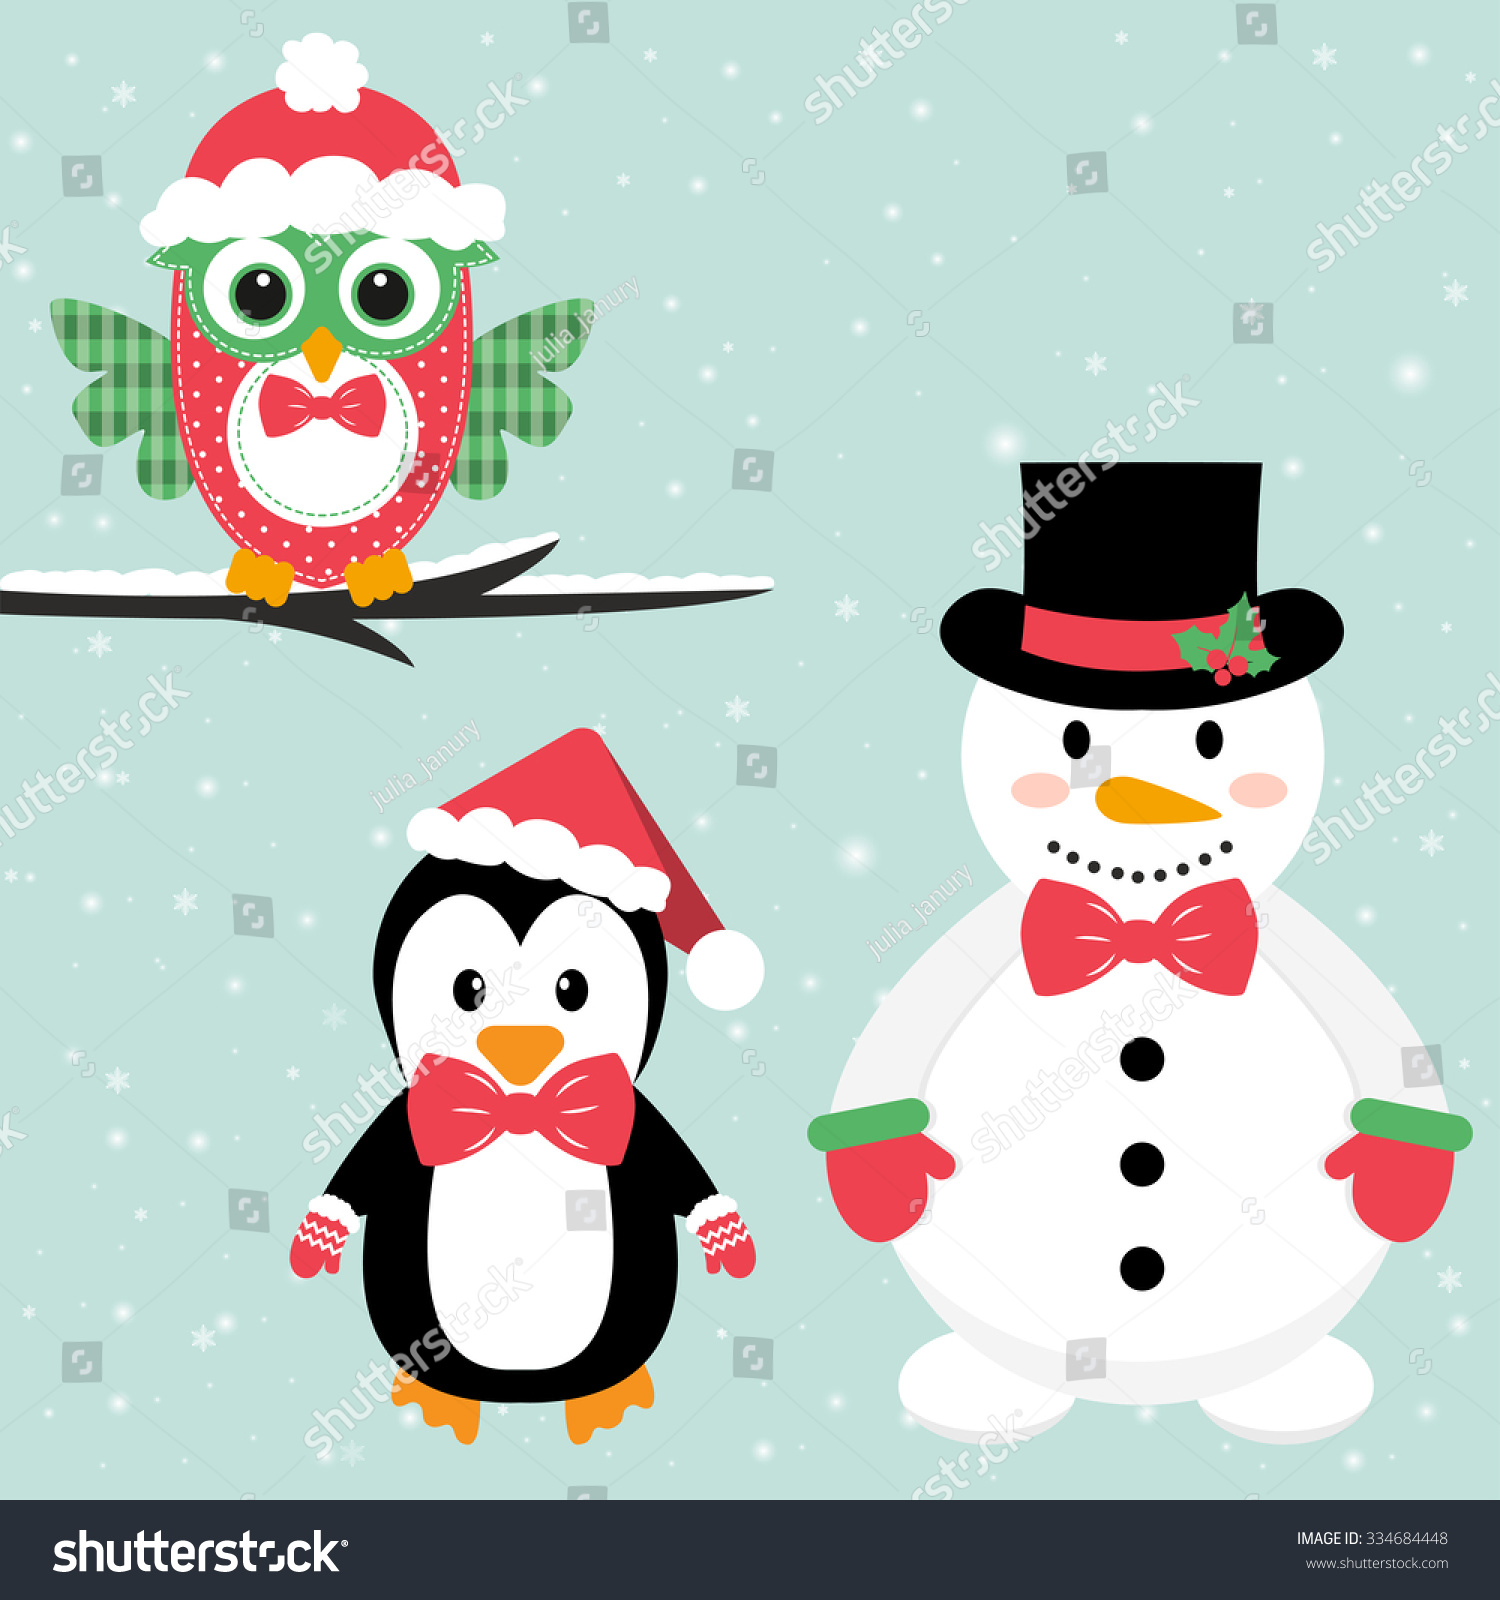 Penguin And Owl And Snowman Stock Vector Illustration 334684448 ...